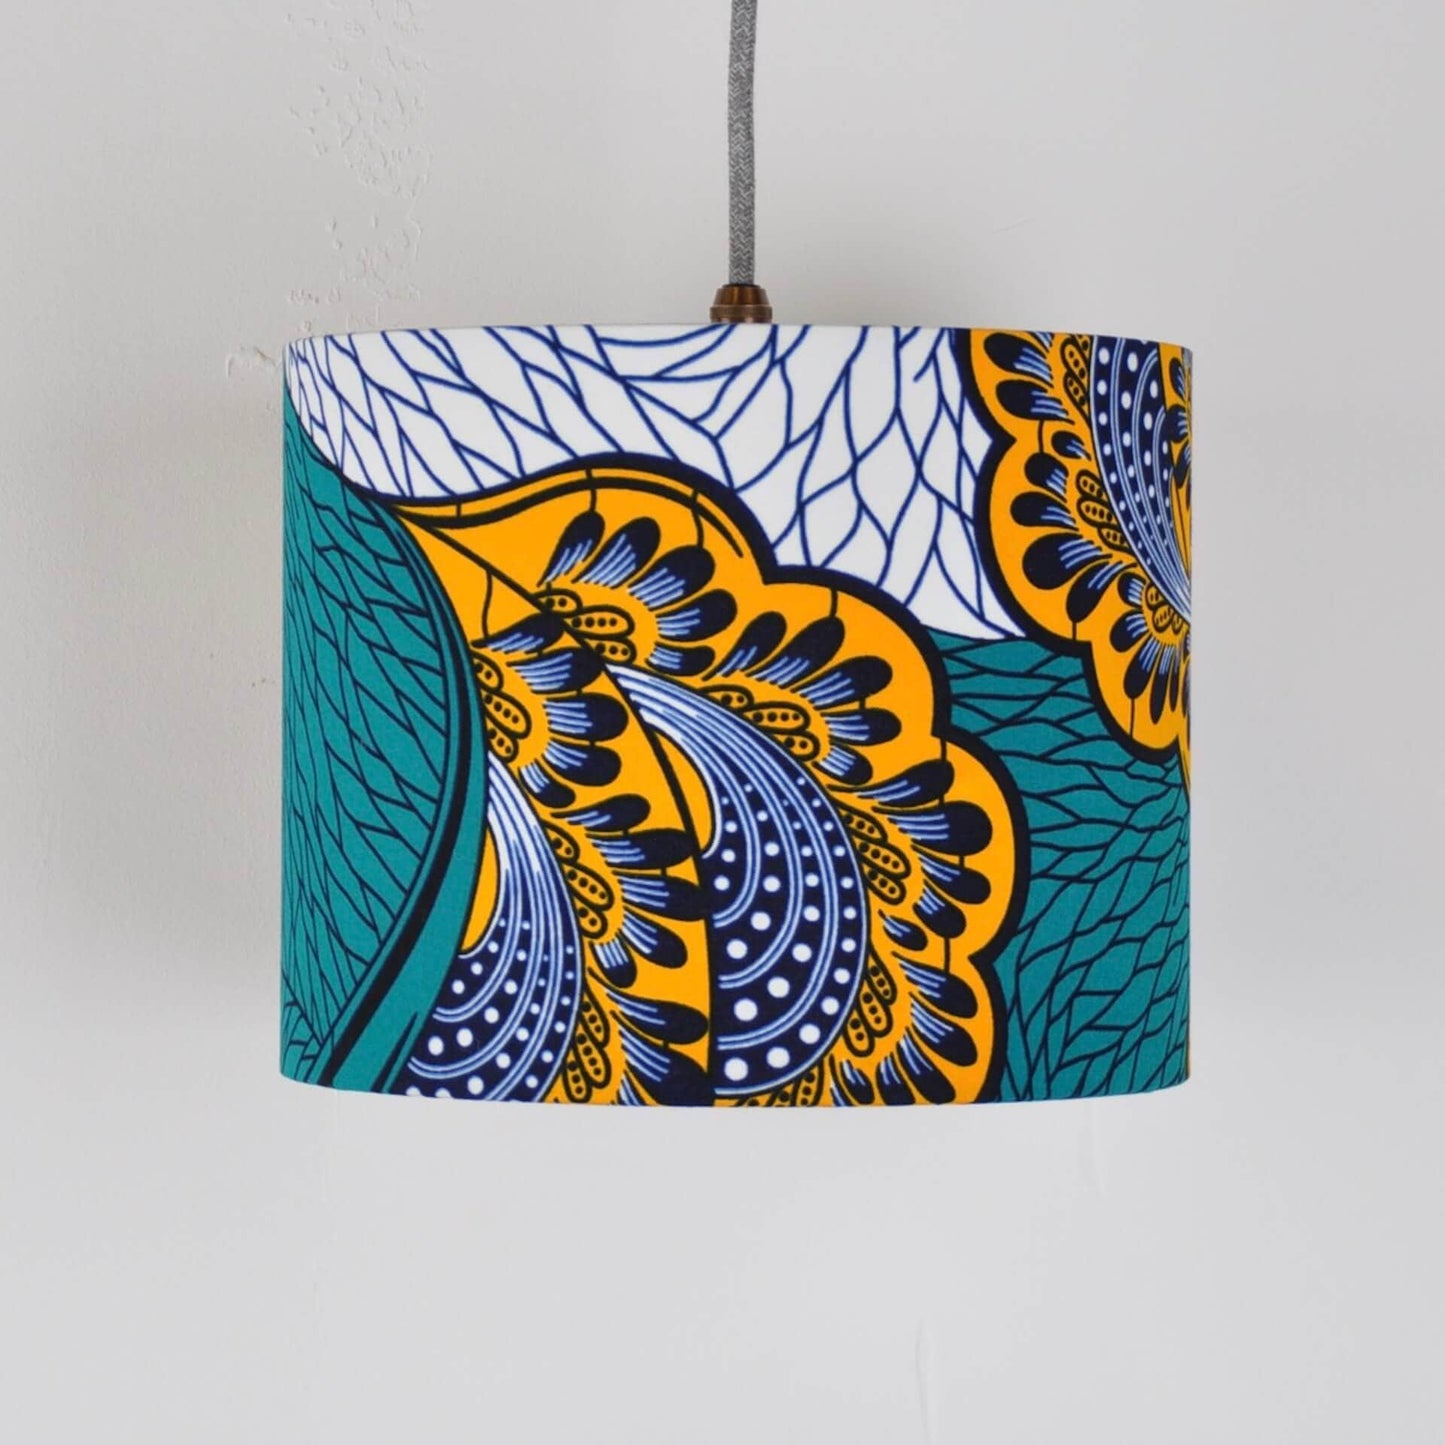 Colourful Shadez Bristol ⌀ 25cm x H 20cm African Print Lampshade - Teal & Yellow Peacock Feather (various sizes)